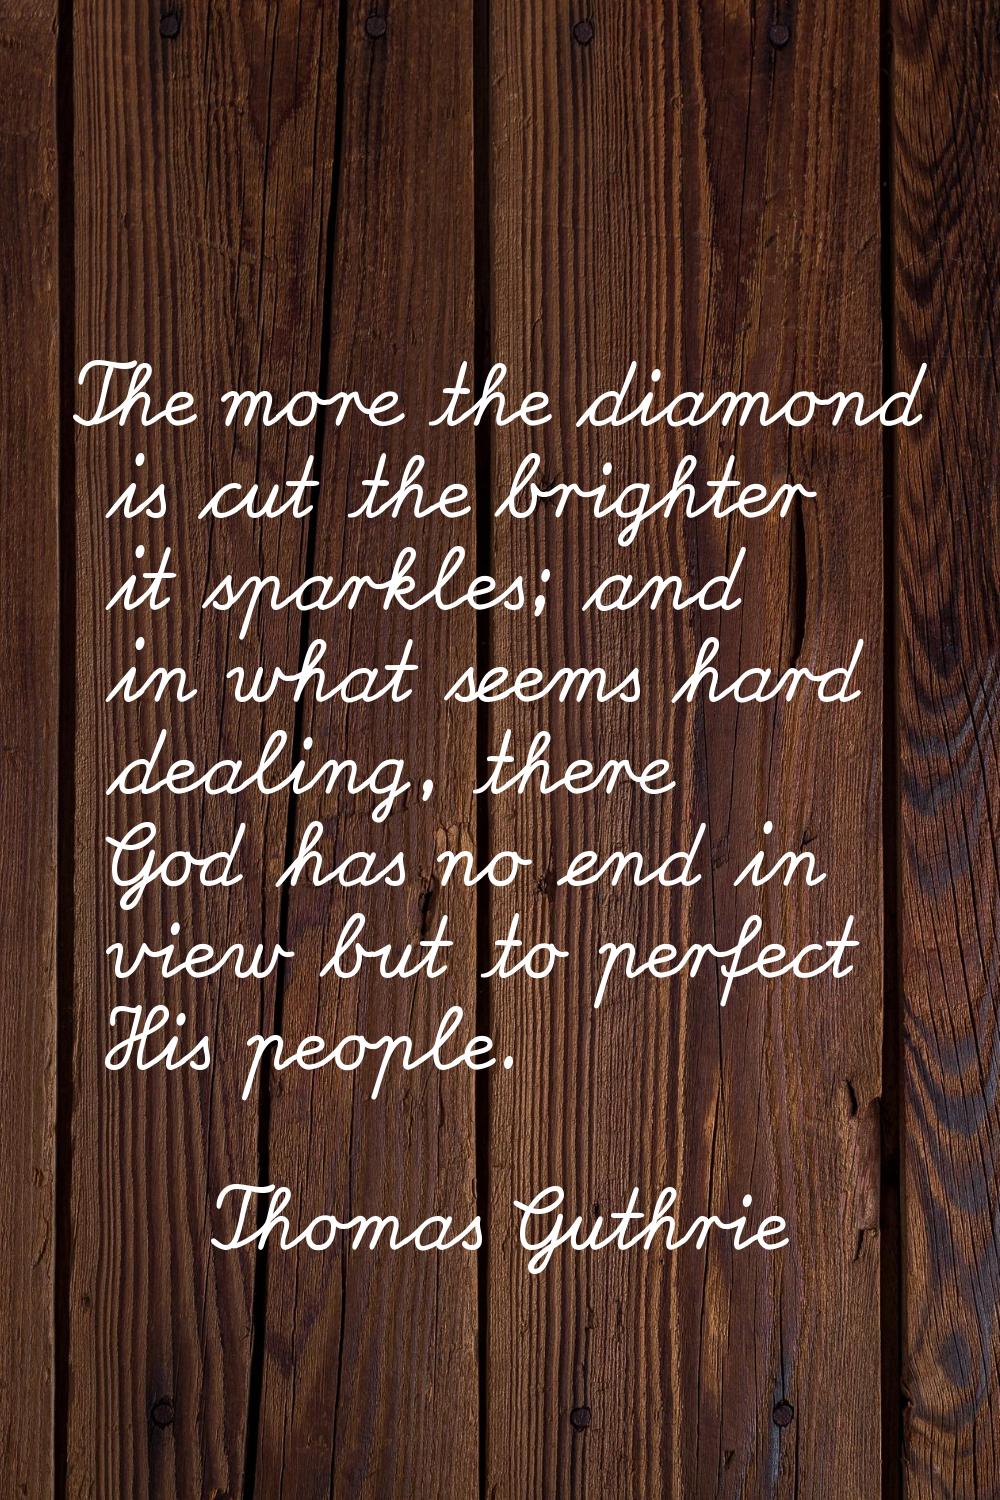 The more the diamond is cut the brighter it sparkles; and in what seems hard dealing, there God has